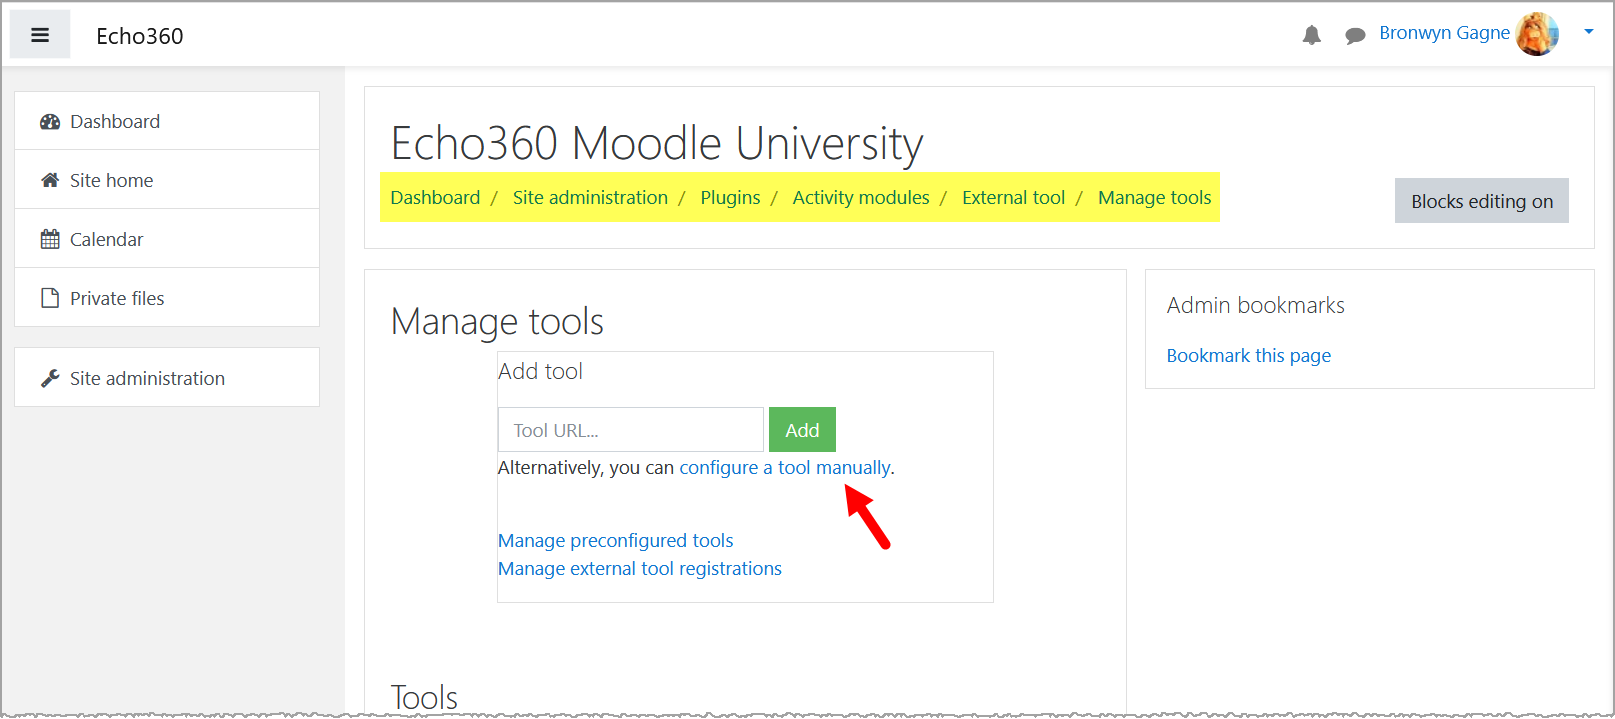 Manage external tools interface in Moodle with navigation and options identified for steps as described